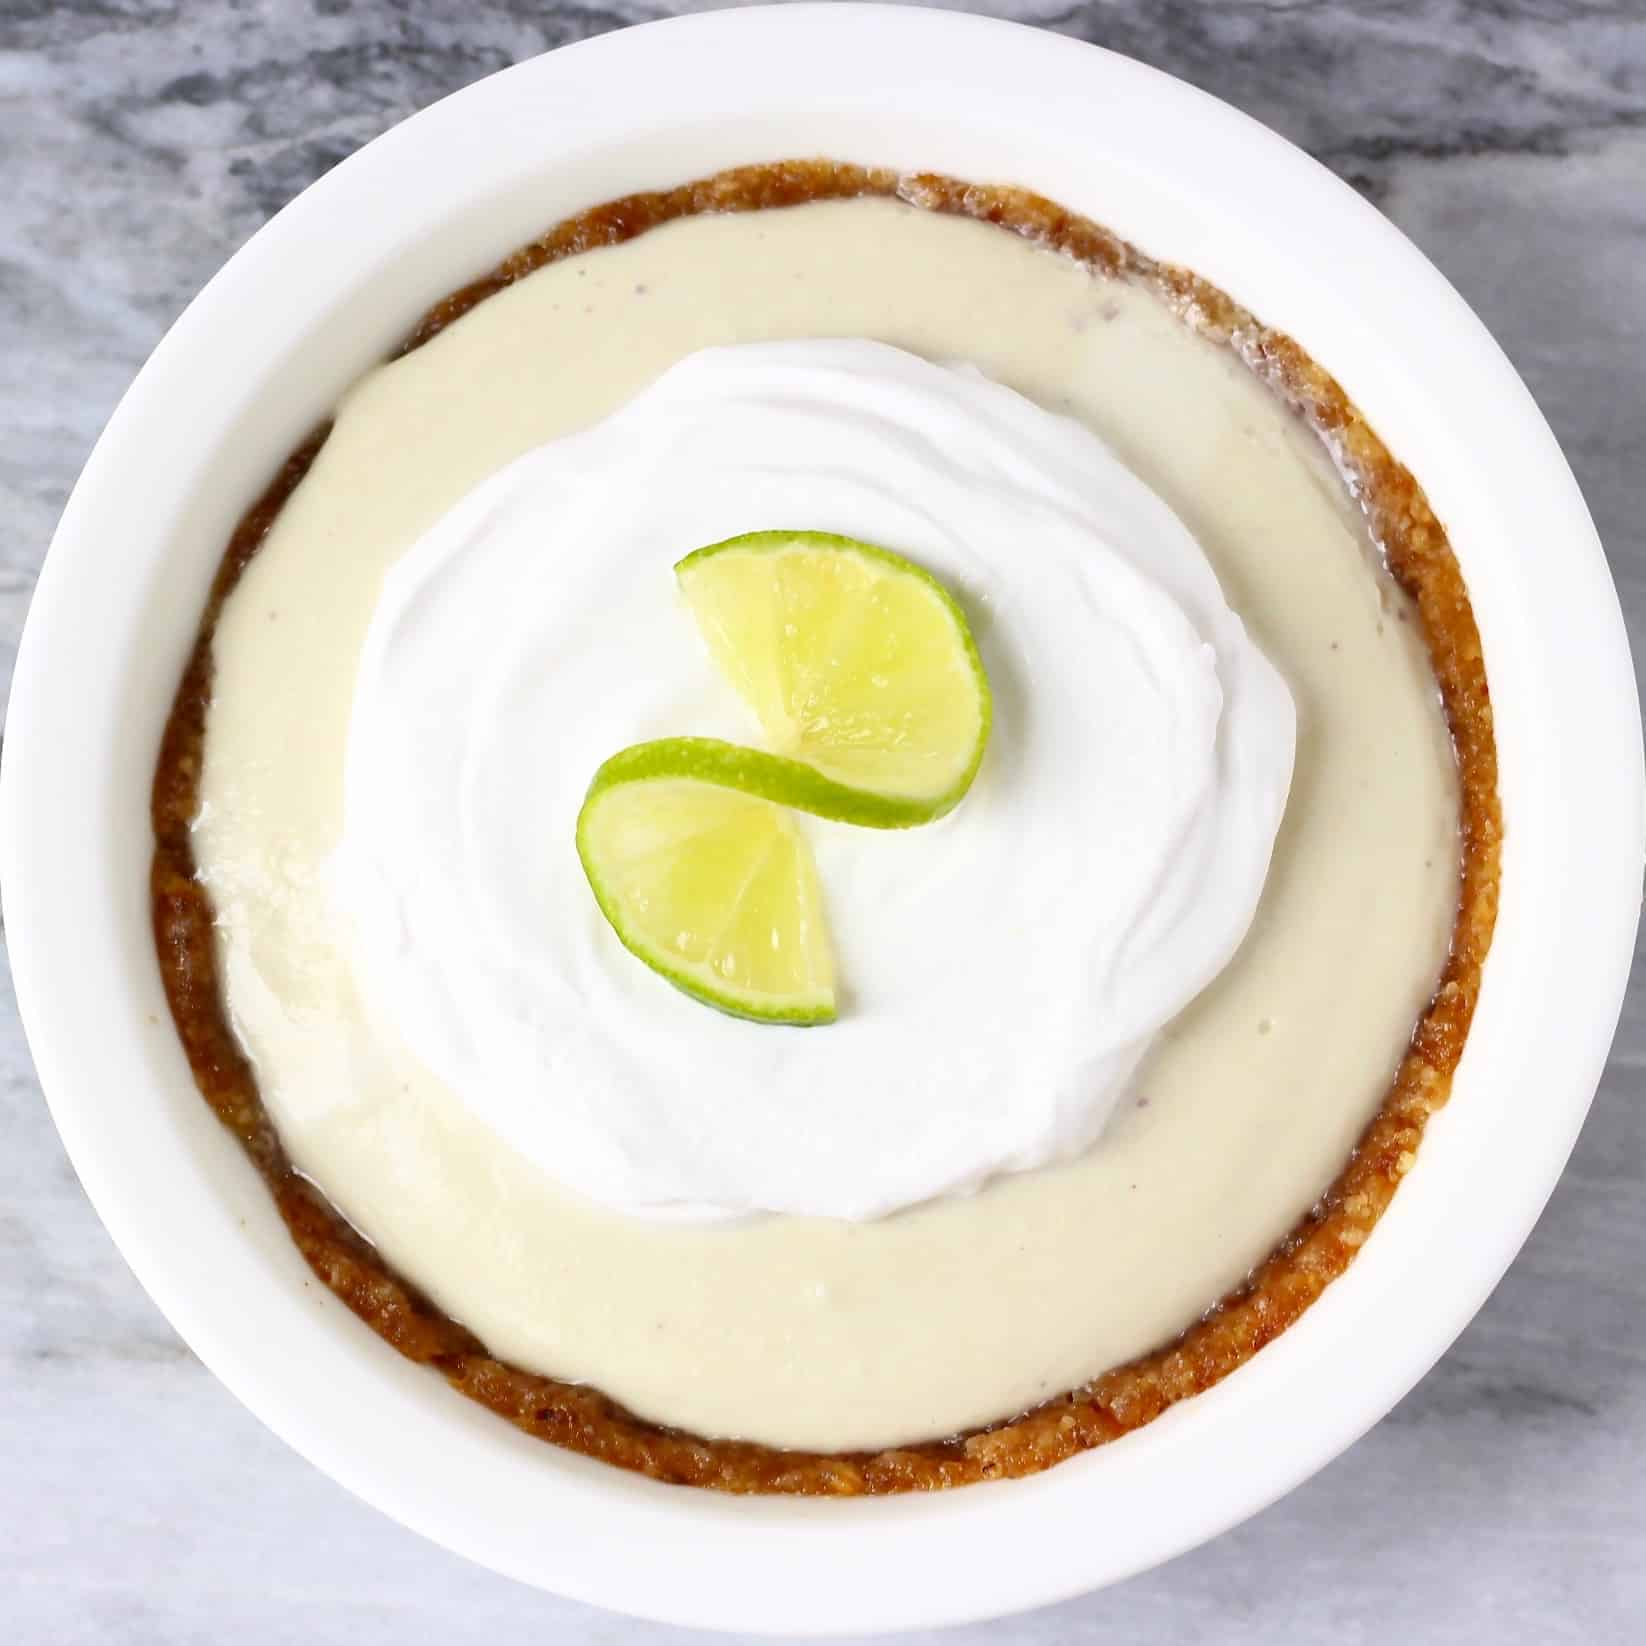 A brown pie crust filled with light green cream topped with white cream and a slice of lime in a white pie dish against a marble background